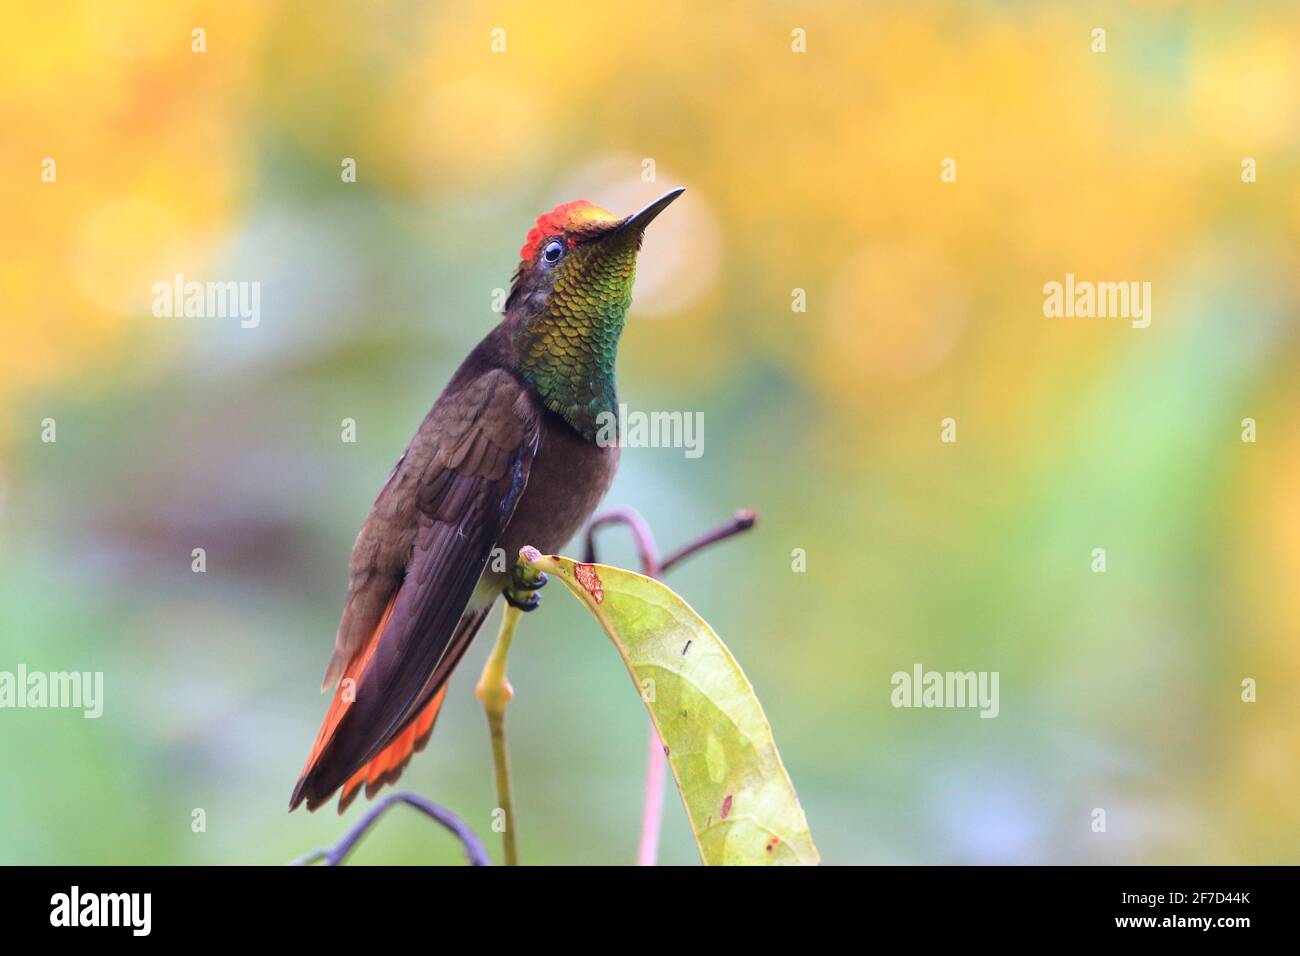 male Ruby-topaz Hummingbird (Chrysolampis mosquitus) perched on a branch against a yellowish and greenish background of defocused flowers Stock Photo